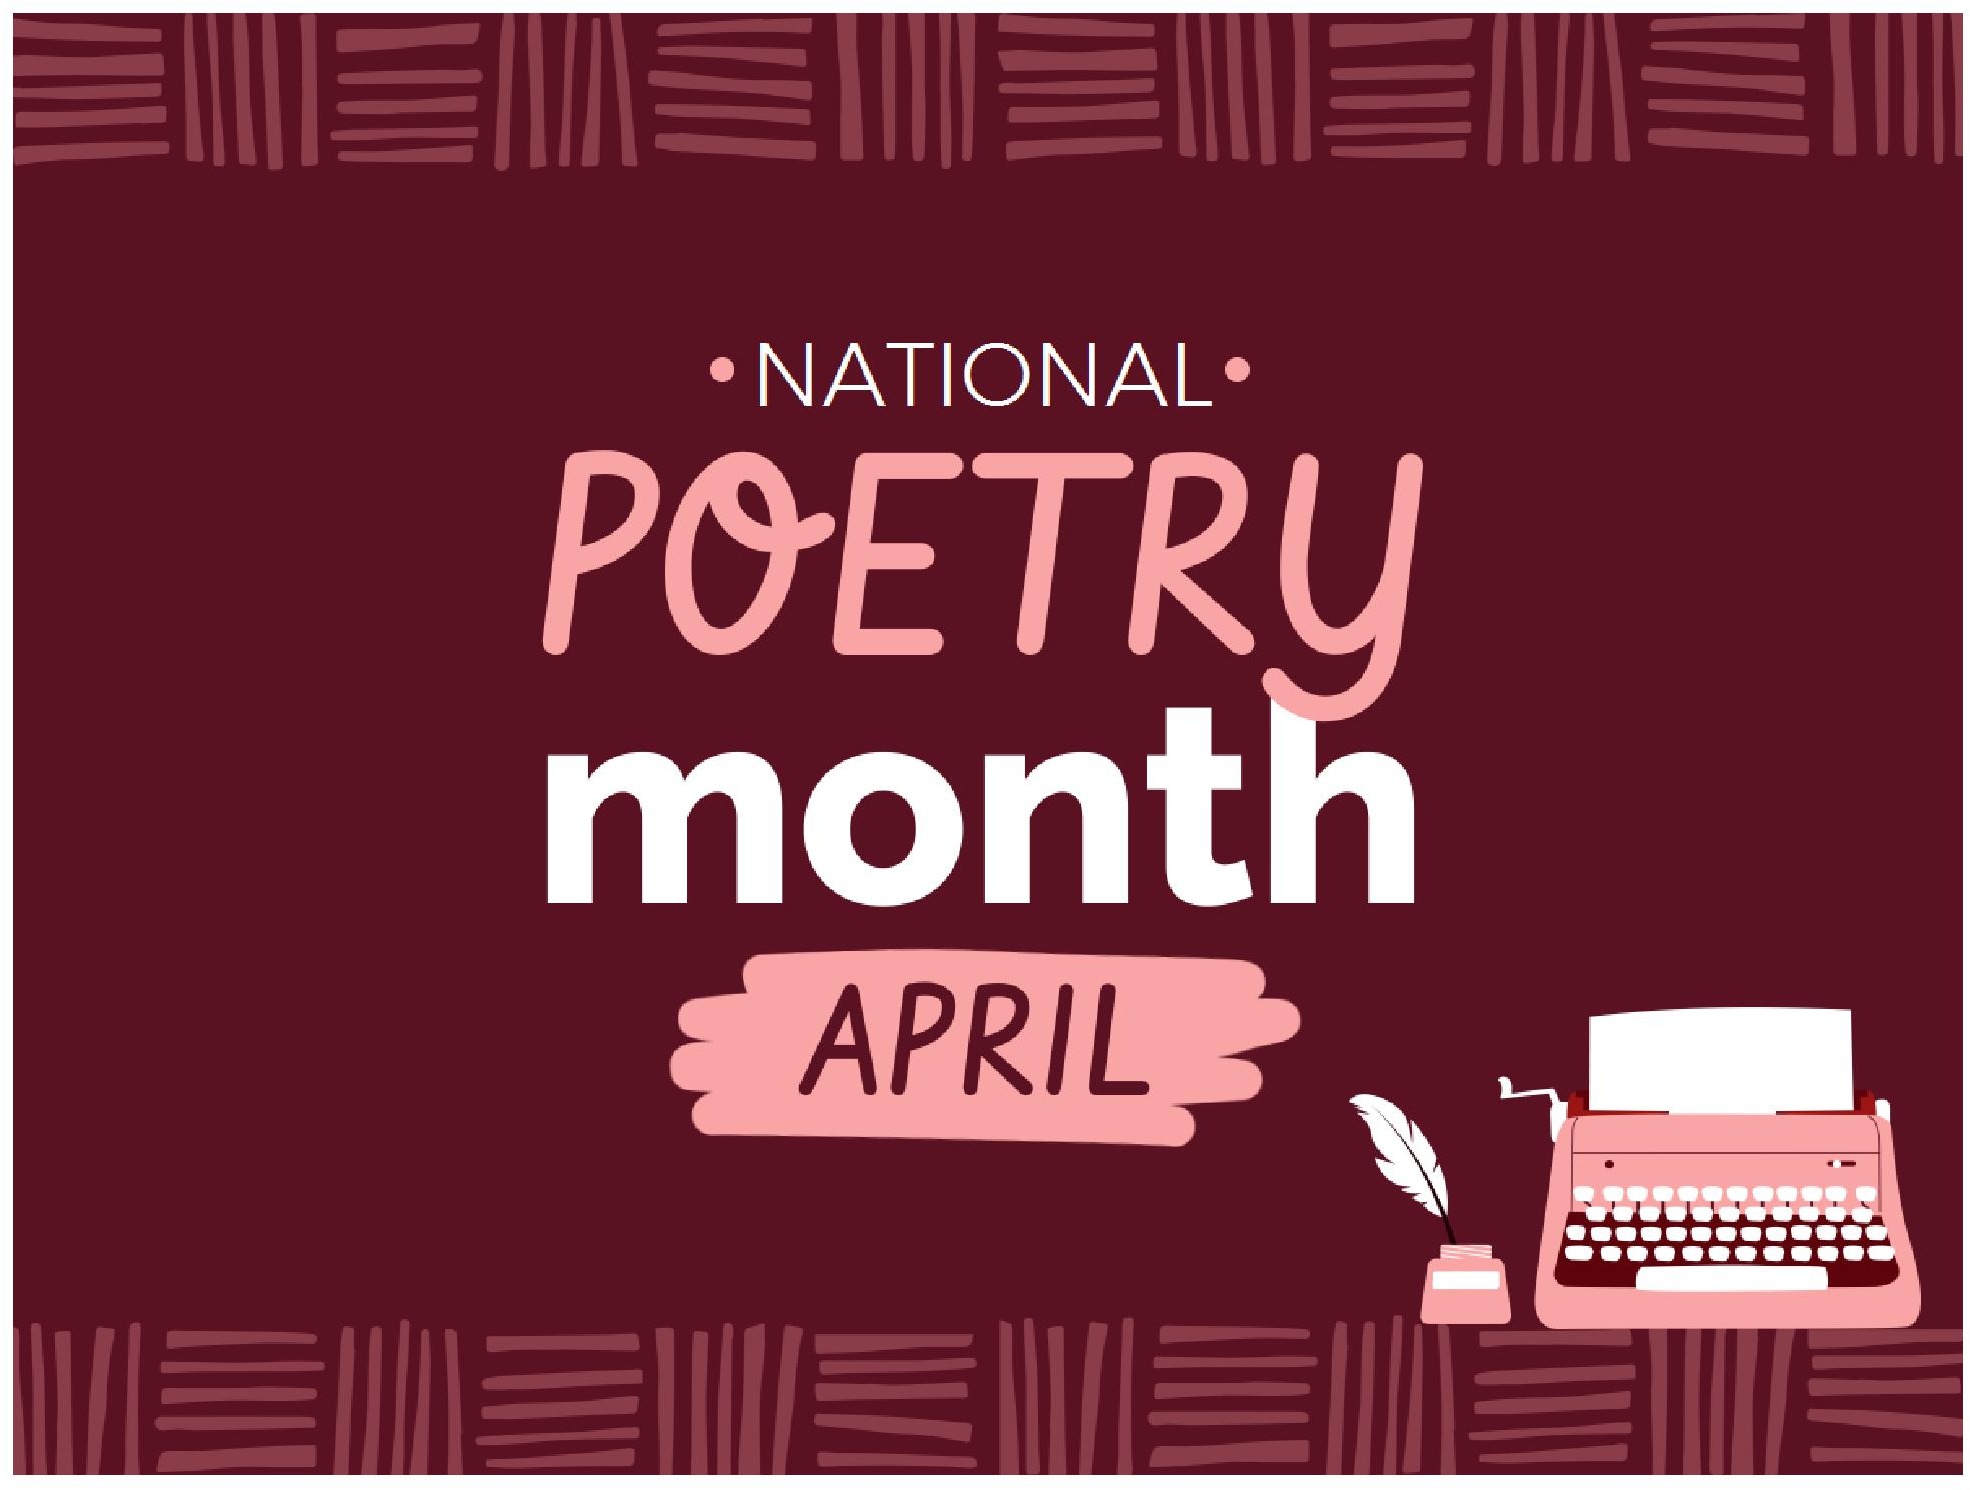 A reddish-brown rectangle with a terra cotta border at the top and bottom. Centered are the words: National Poetry Month April in several different fonts. At the bottom right is a drawing of an ink bottle with a feather pen stuck in it and a manual typewriter.